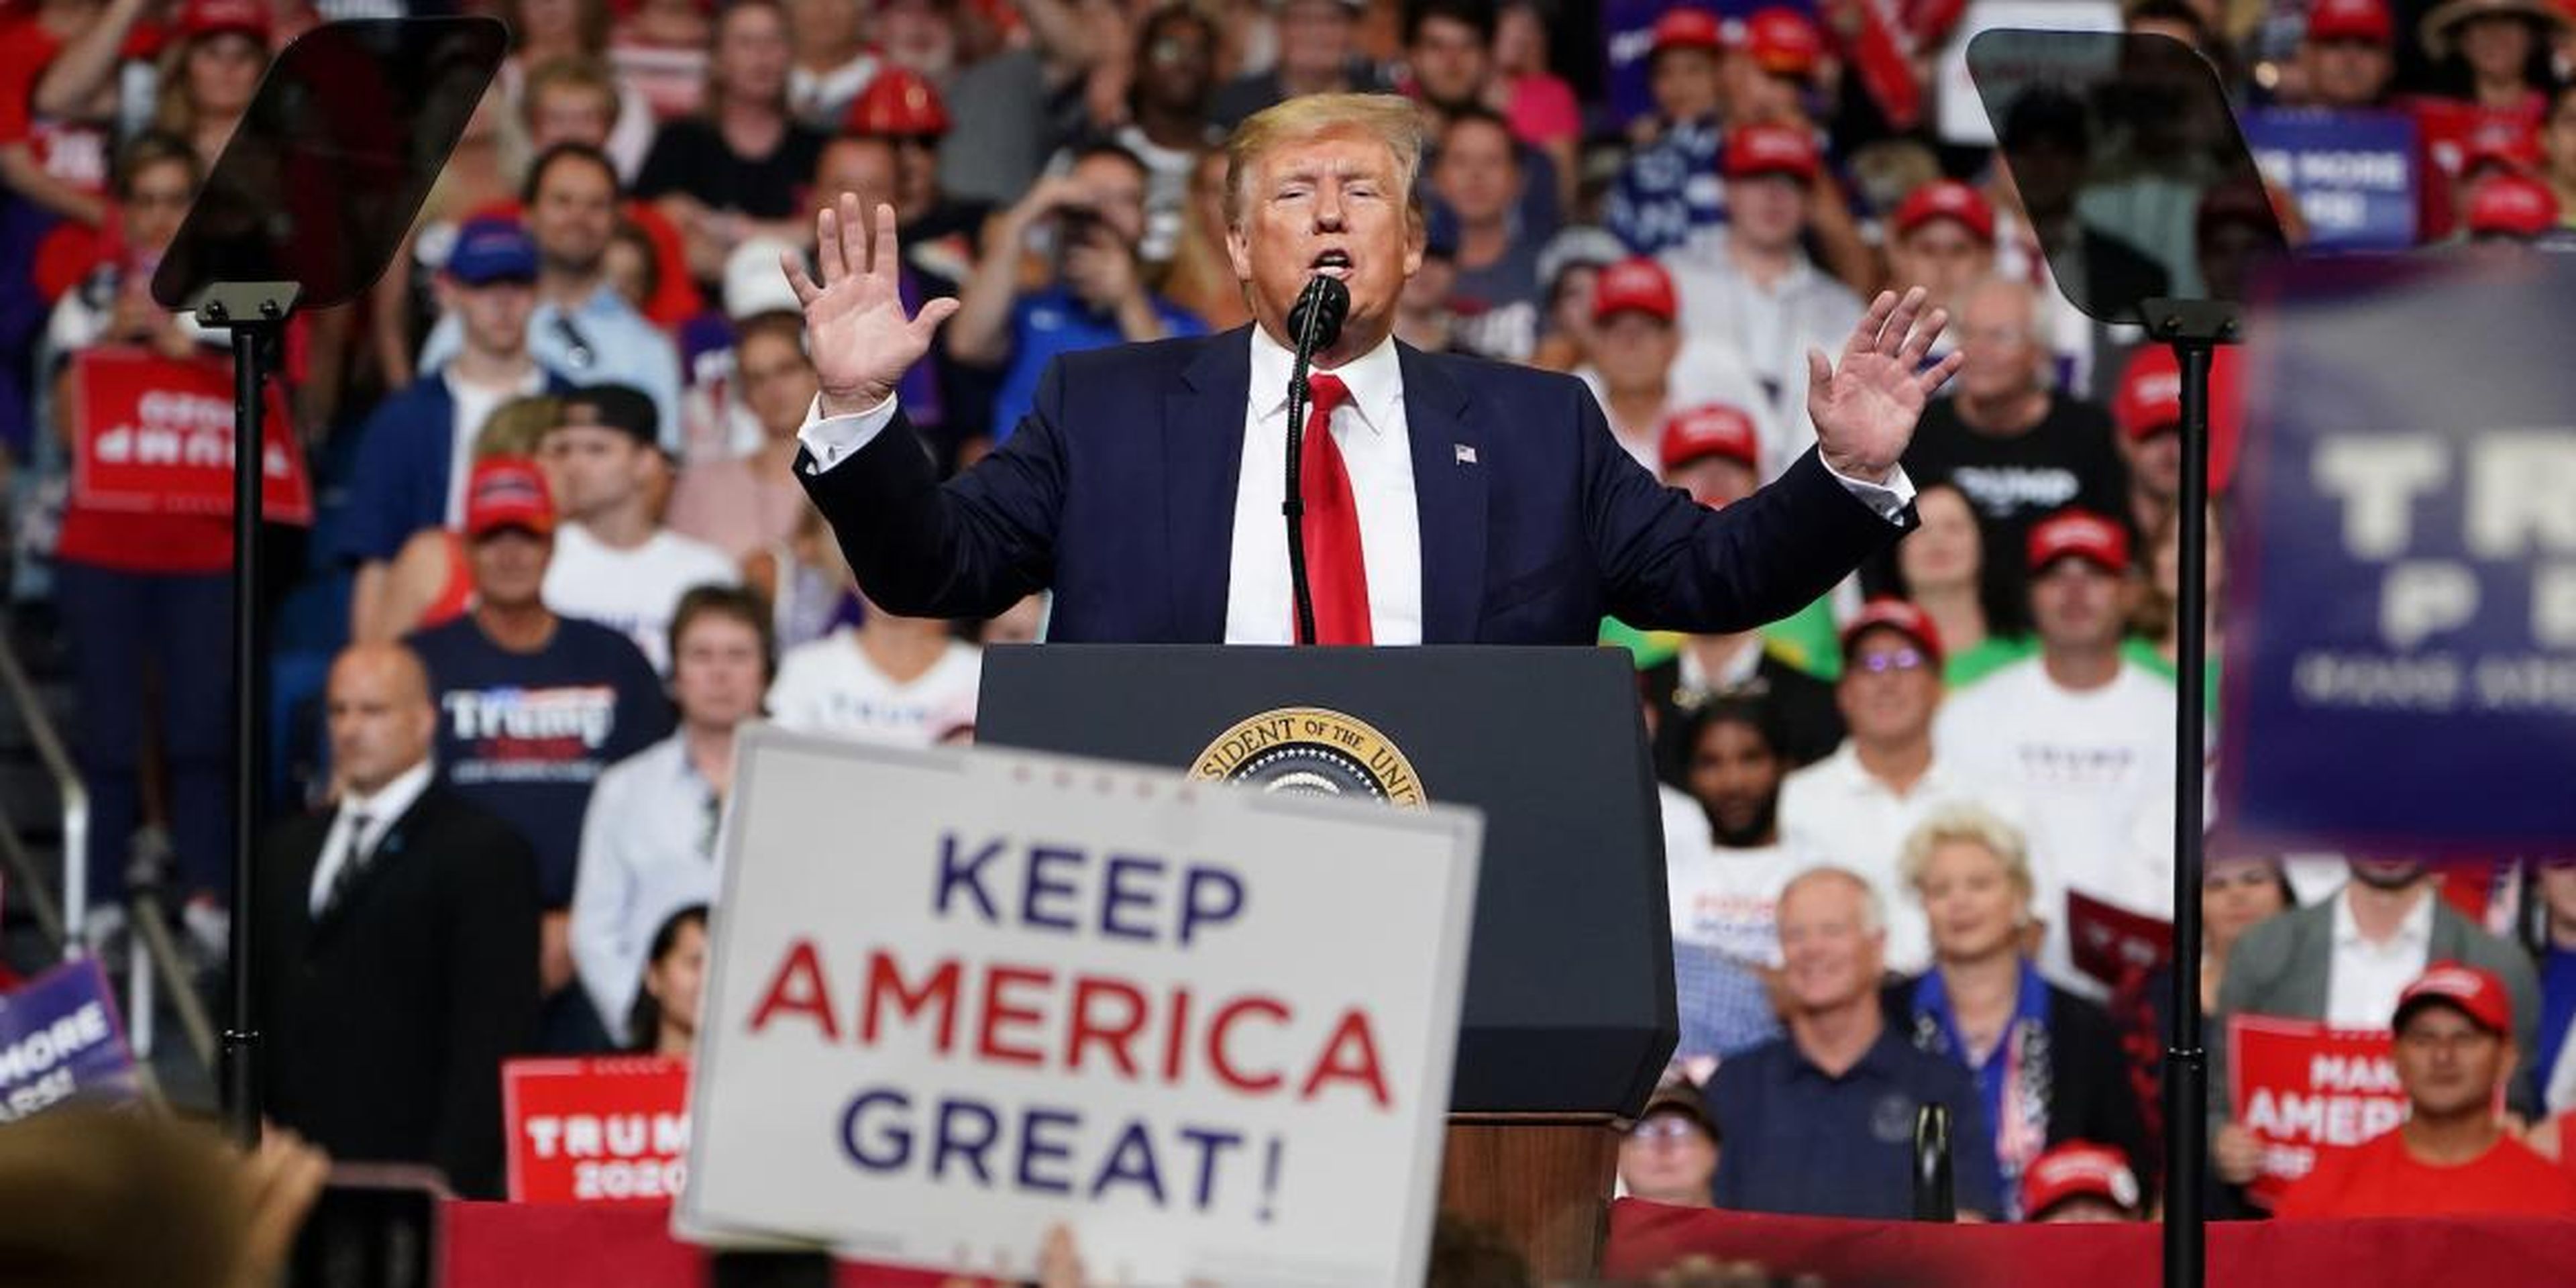 President Donald Trump at the launch of his 2020 campaign at the Amway Center in Orlando, Florida, June 18, 2019.